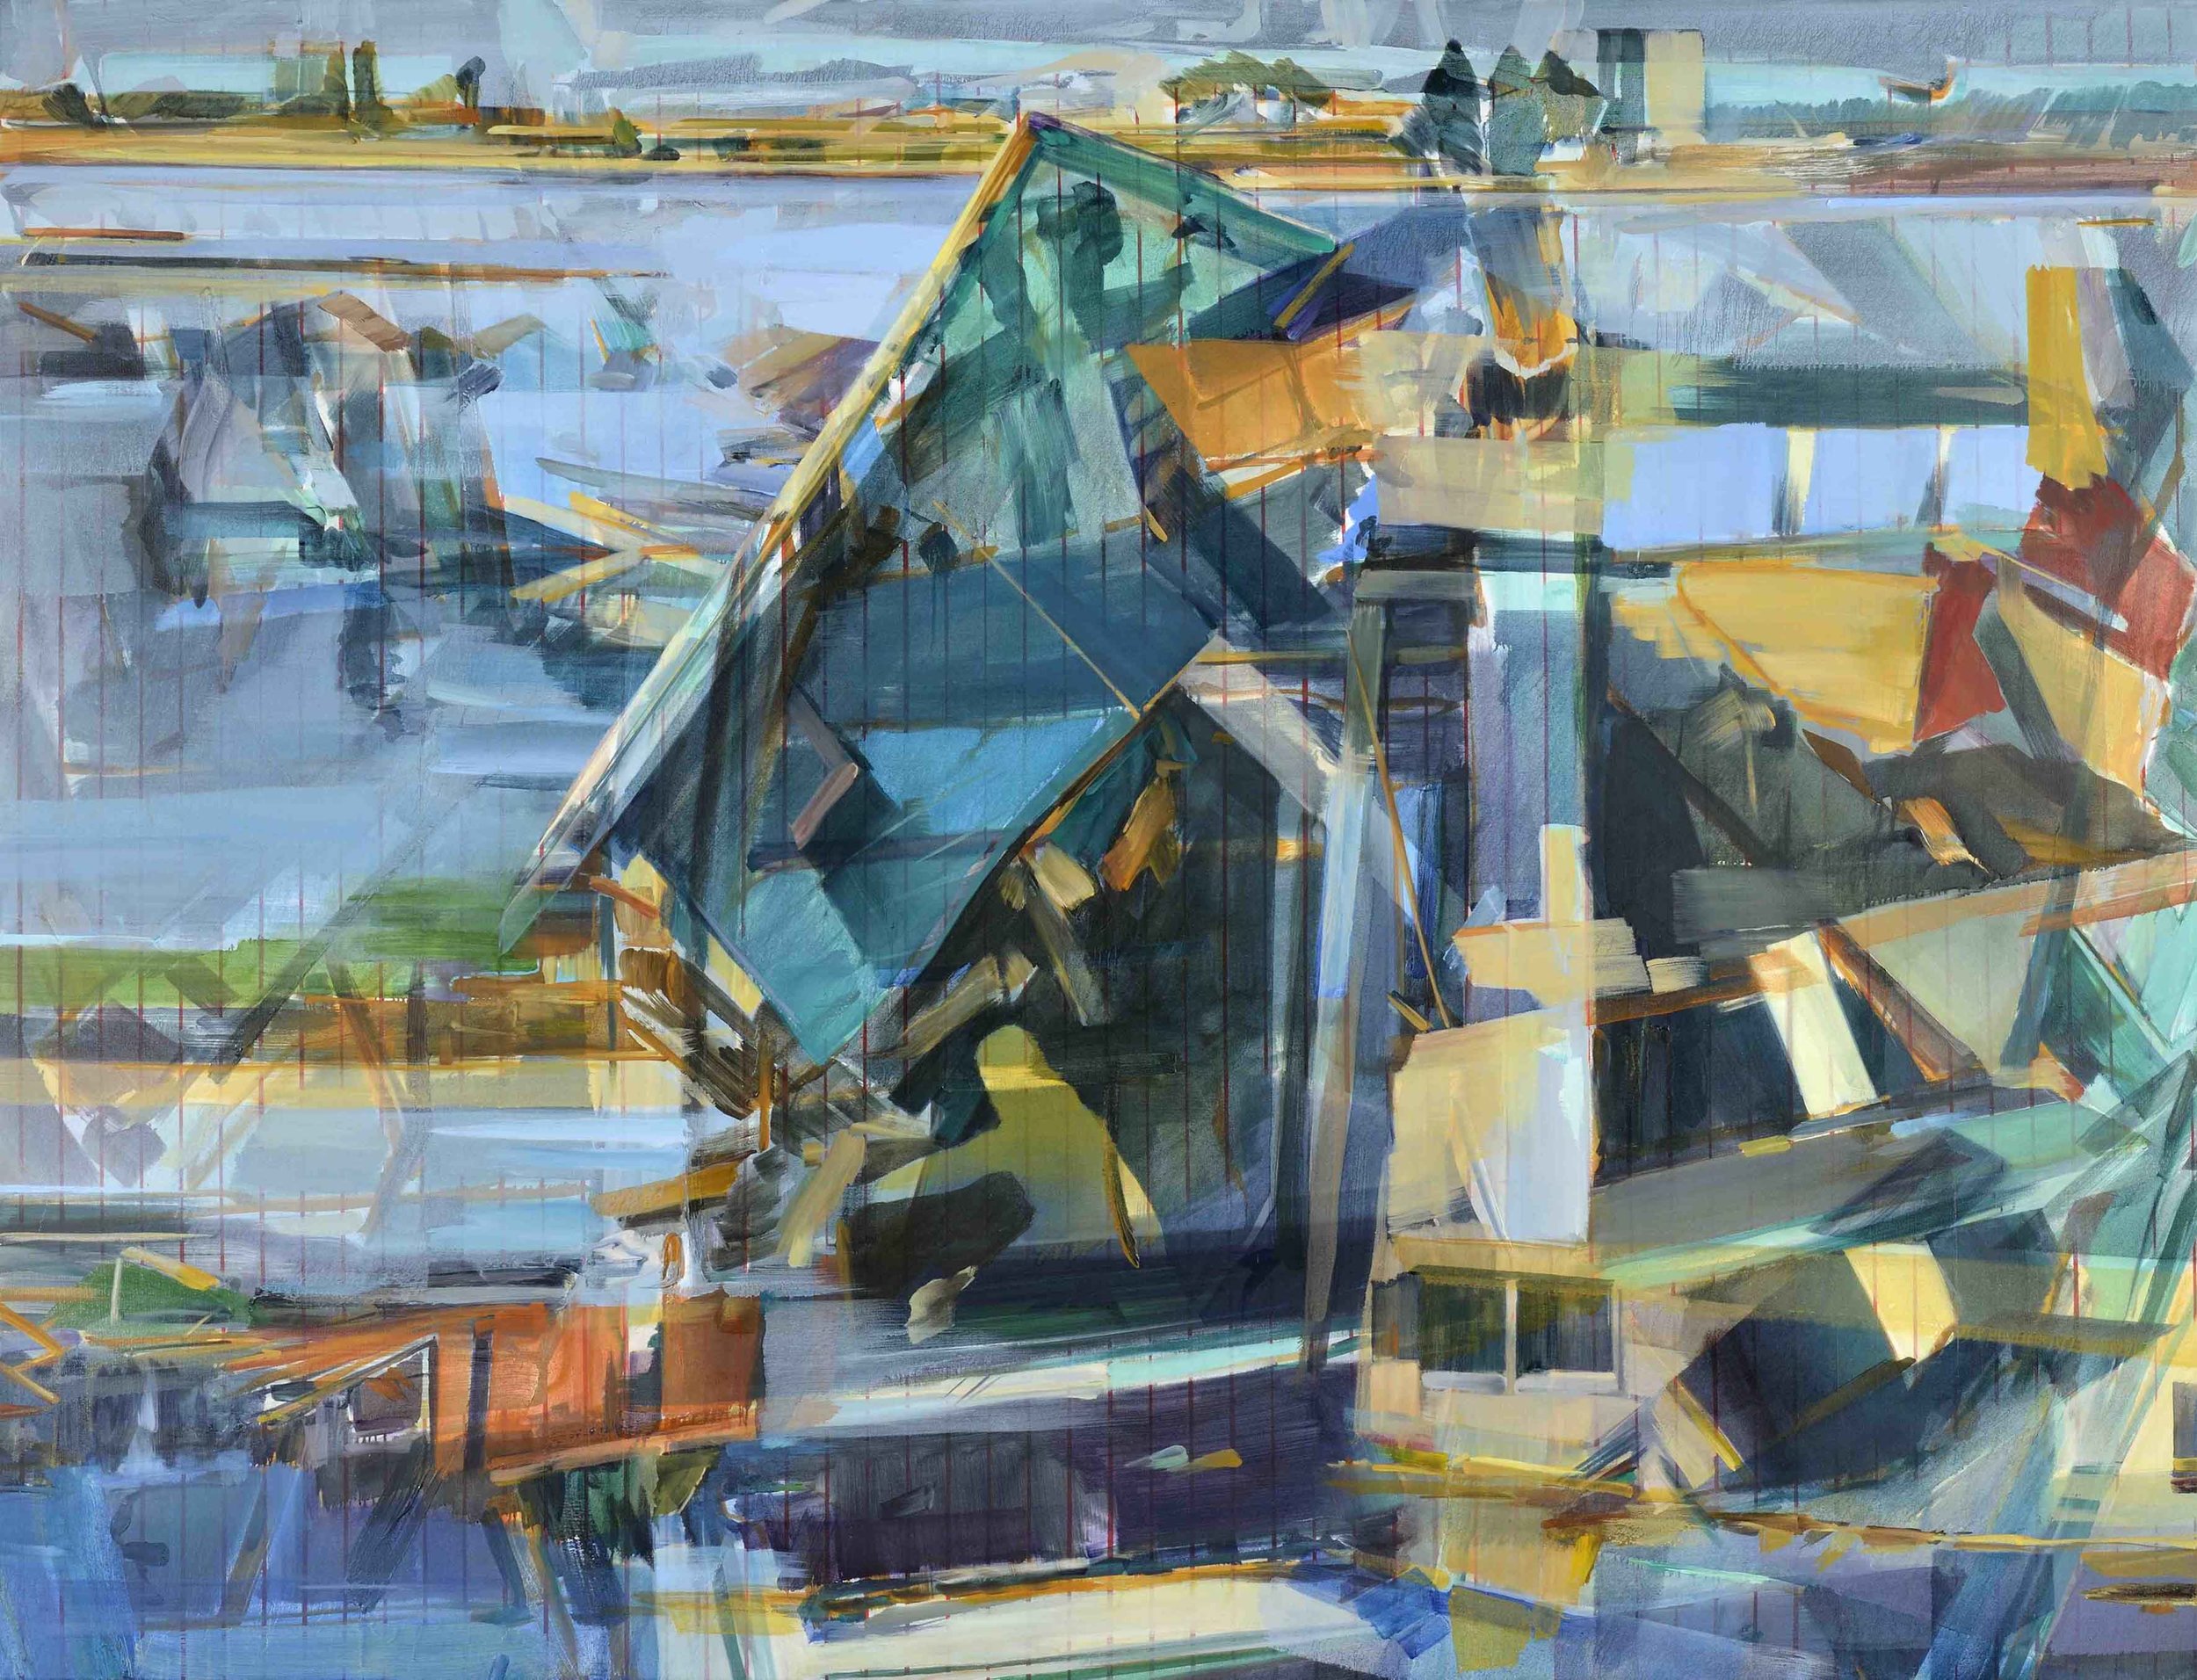   Multiple realities (multiple horizons) , Johannesburg/London, 2016, oil and alkyd on canvas, 230 x 300cm. Musée du Louvre Abu Dhabi Collection 